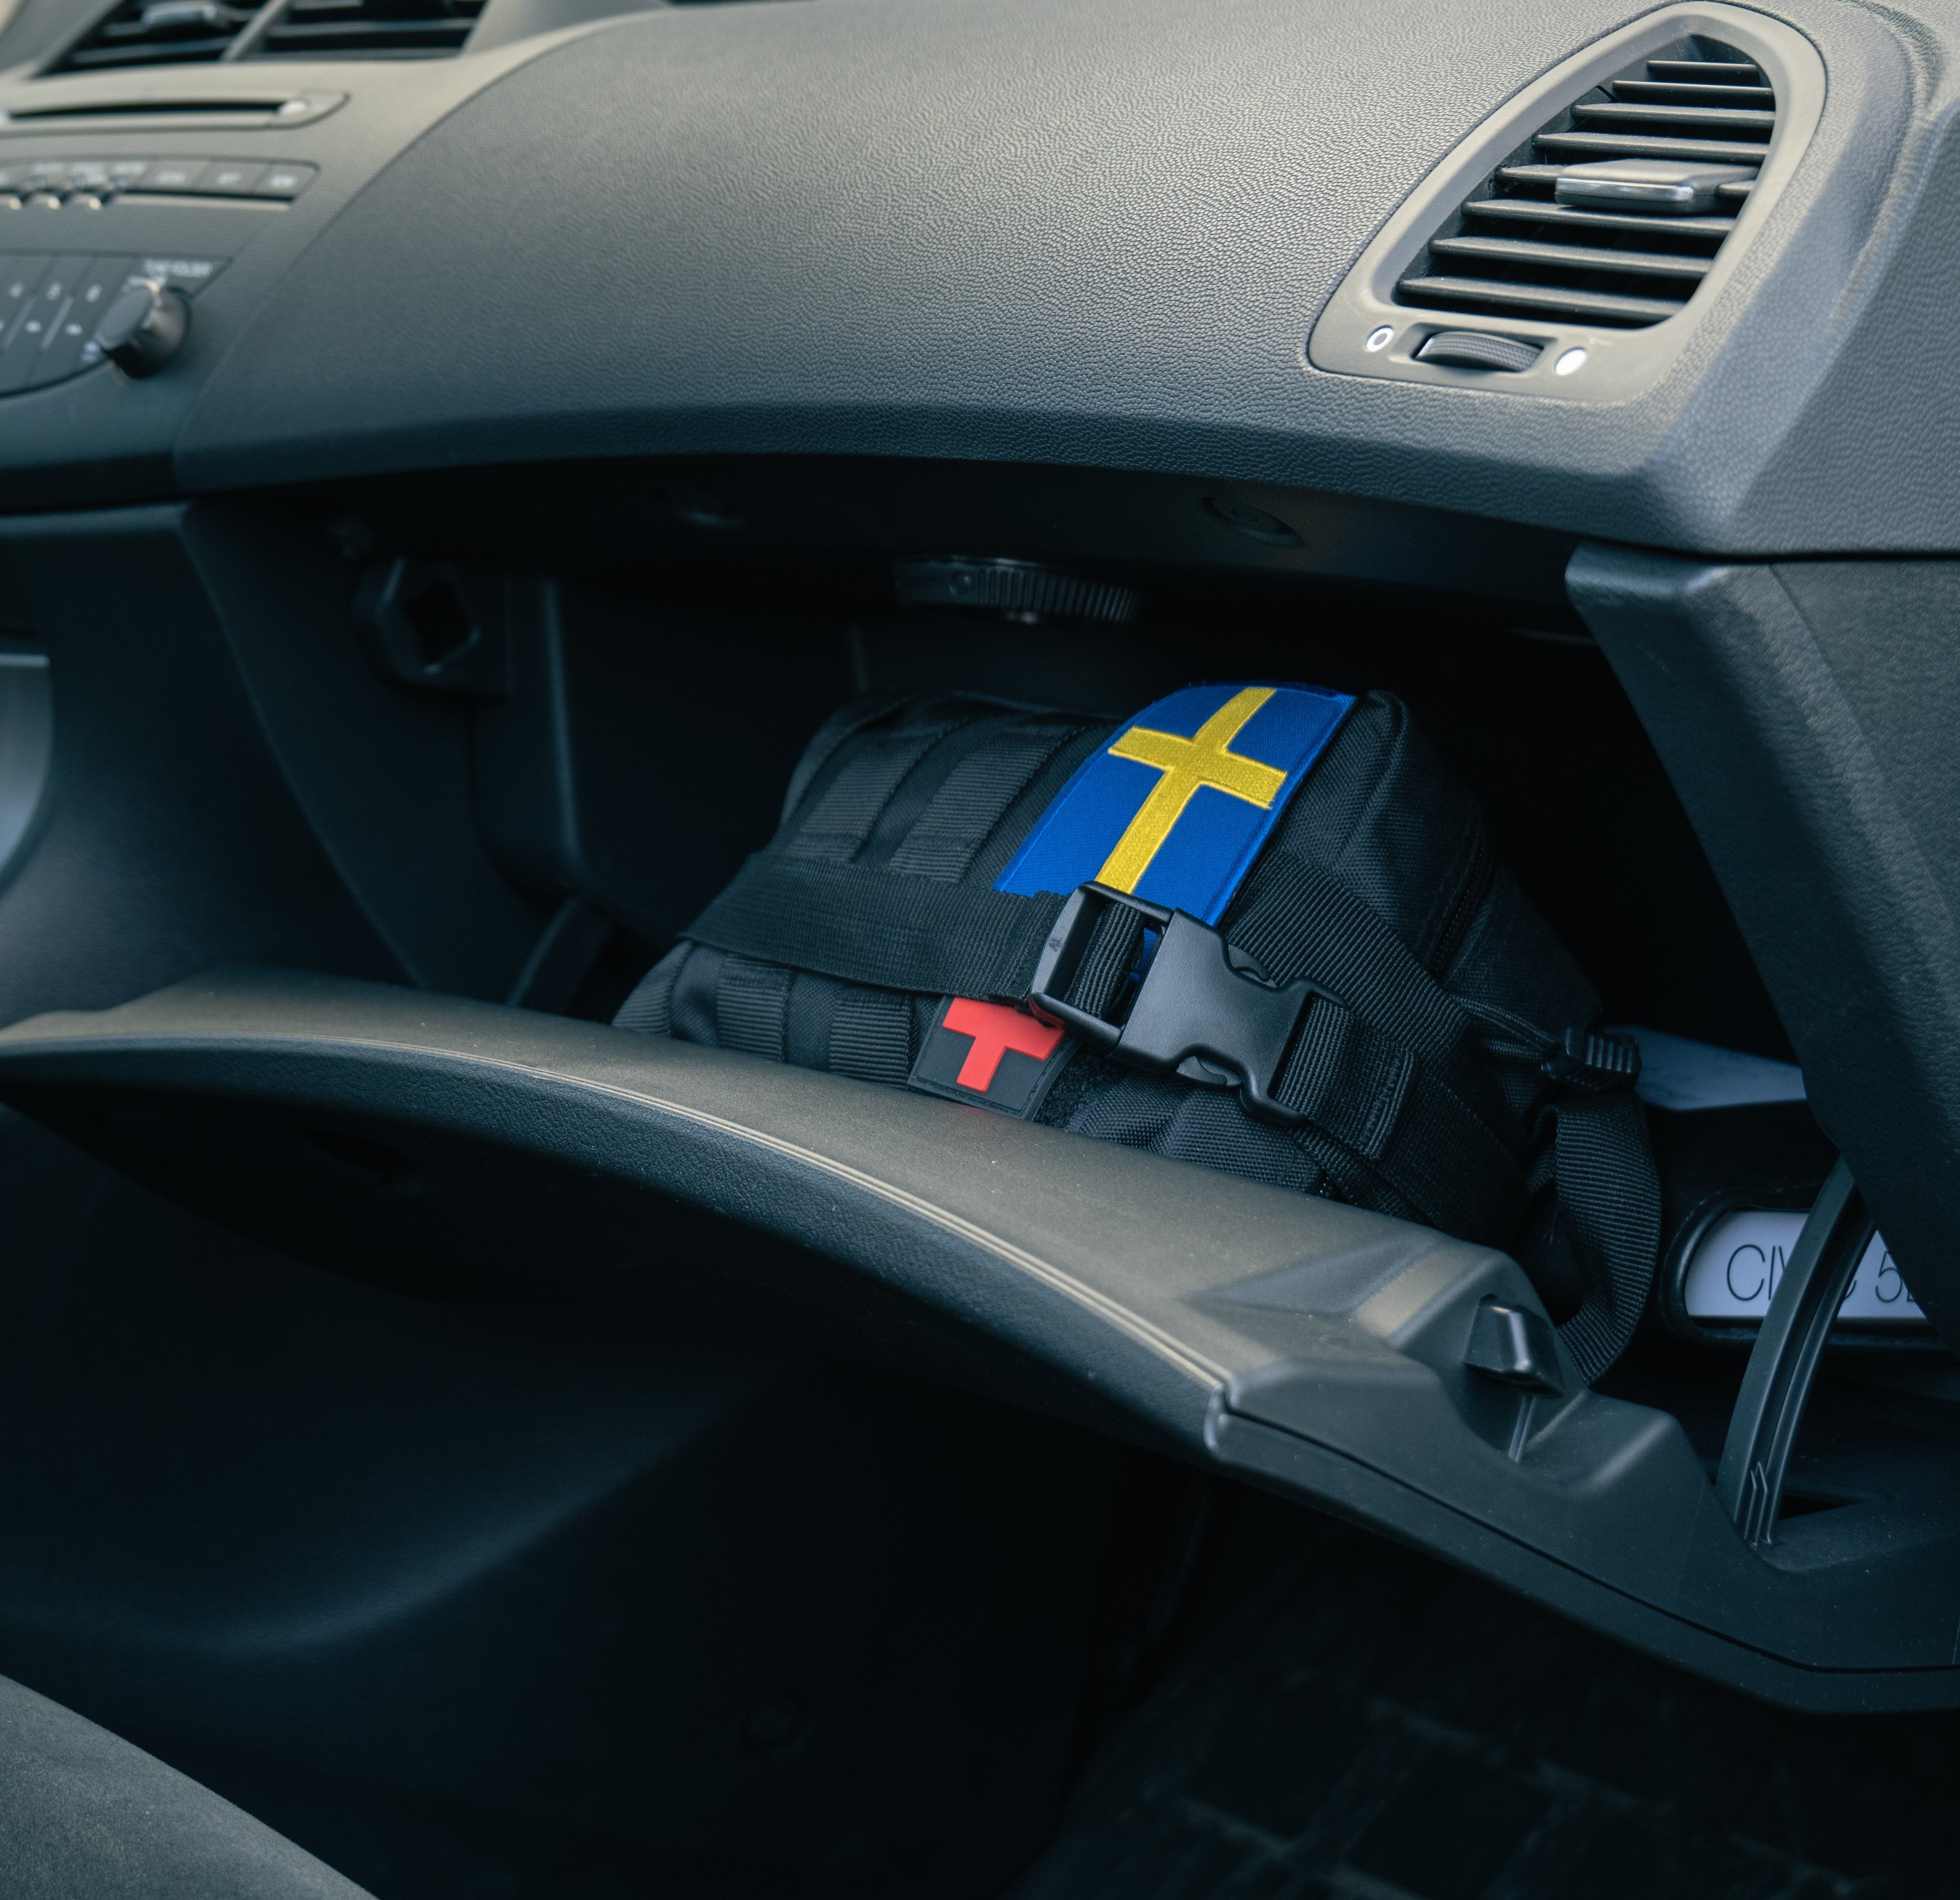 A survival kit inside the open glove compartment of a car